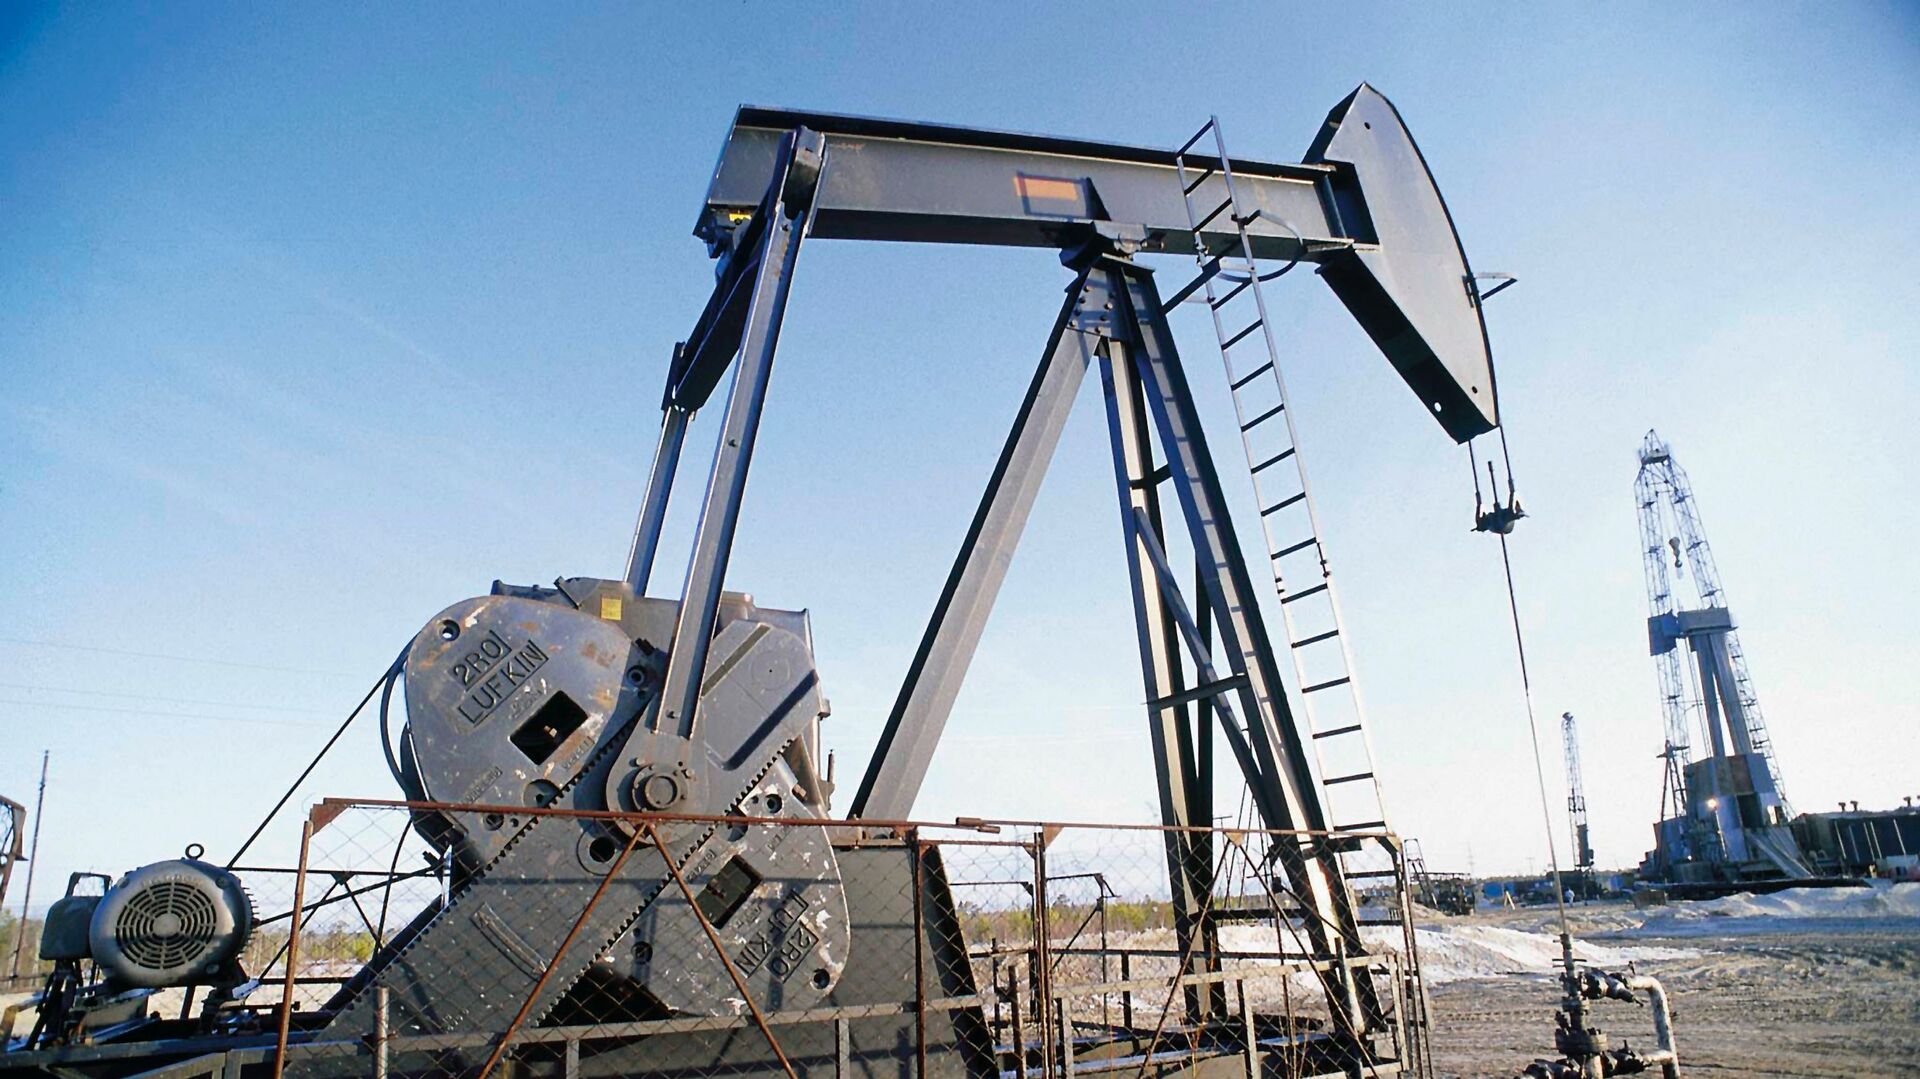 The prices of West Texas Intermediate (WTI), the US oil benchmark, and Brent crude, the global oil benchmark, hit record lows not seen since April 2009 on Tuesday. - Sputnik Азербайджан, 1920, 01.02.2023